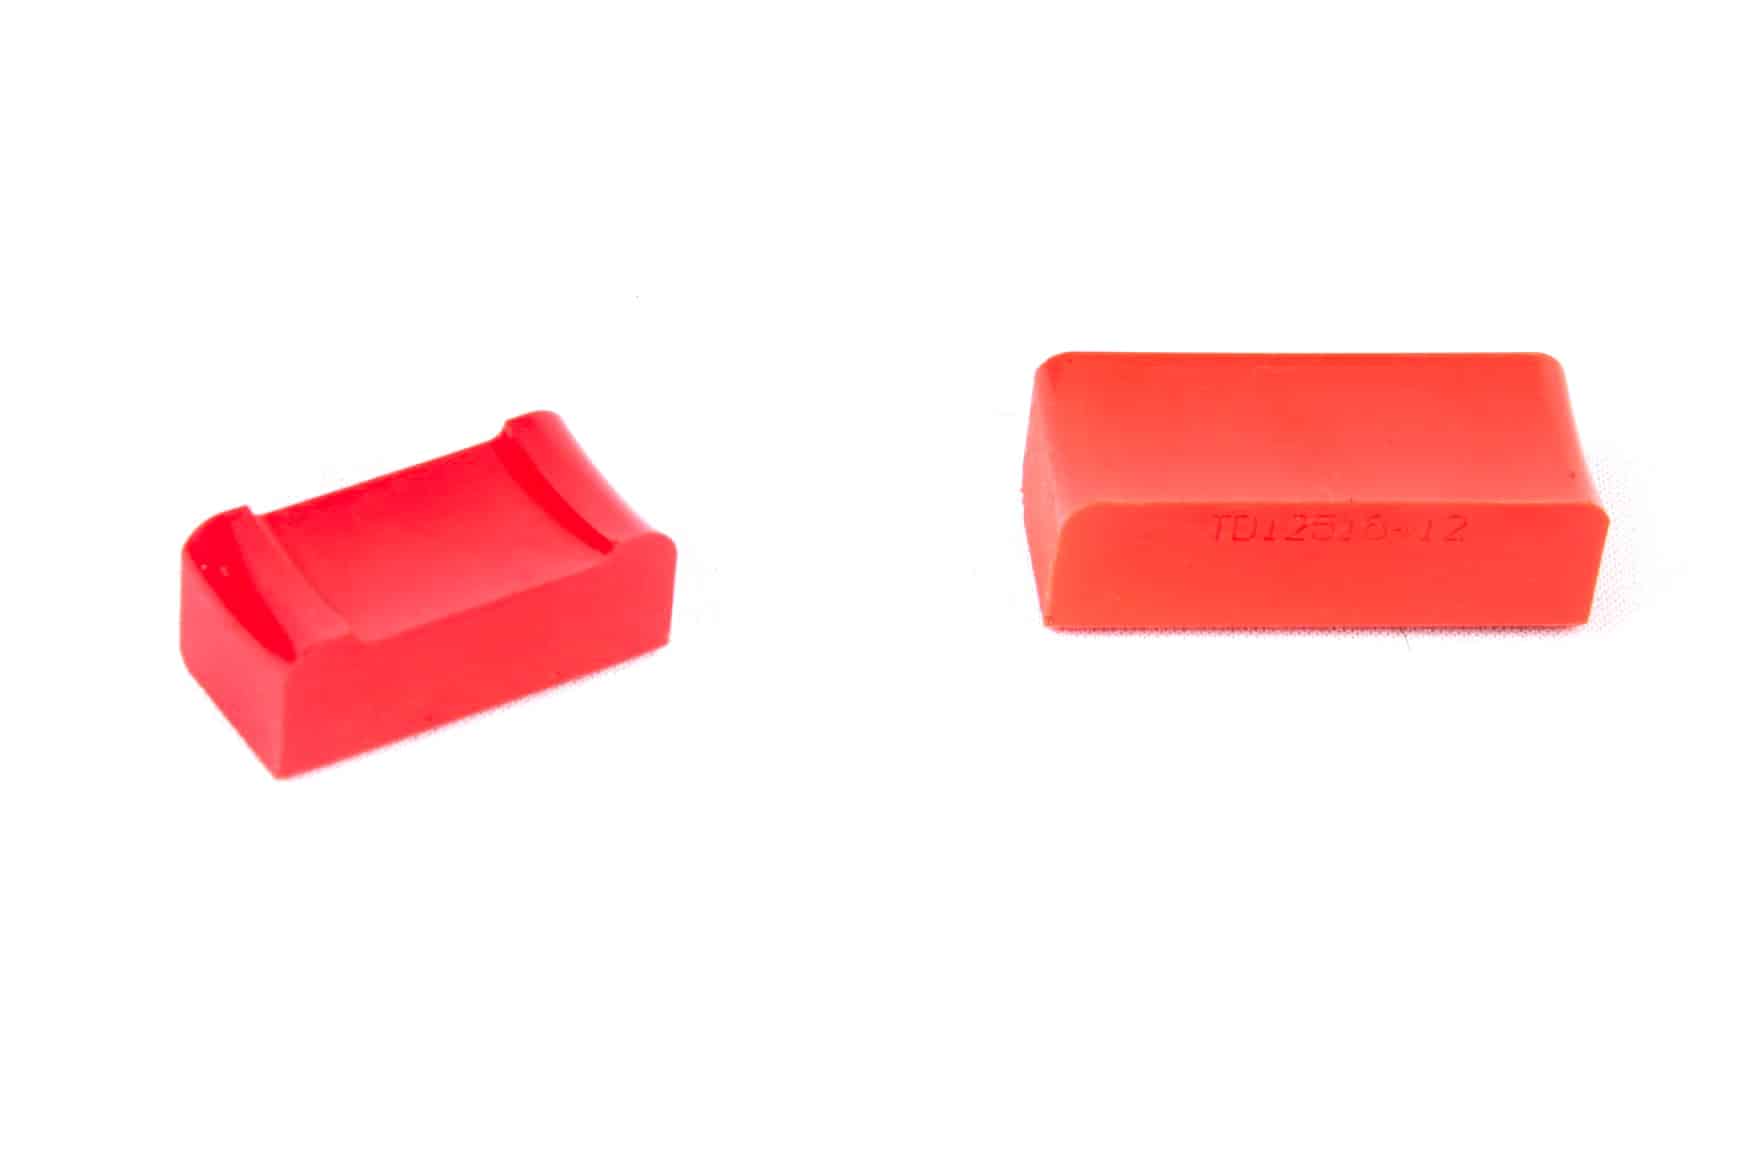 Small, red polyurethane pallets for carrying dunnage. 